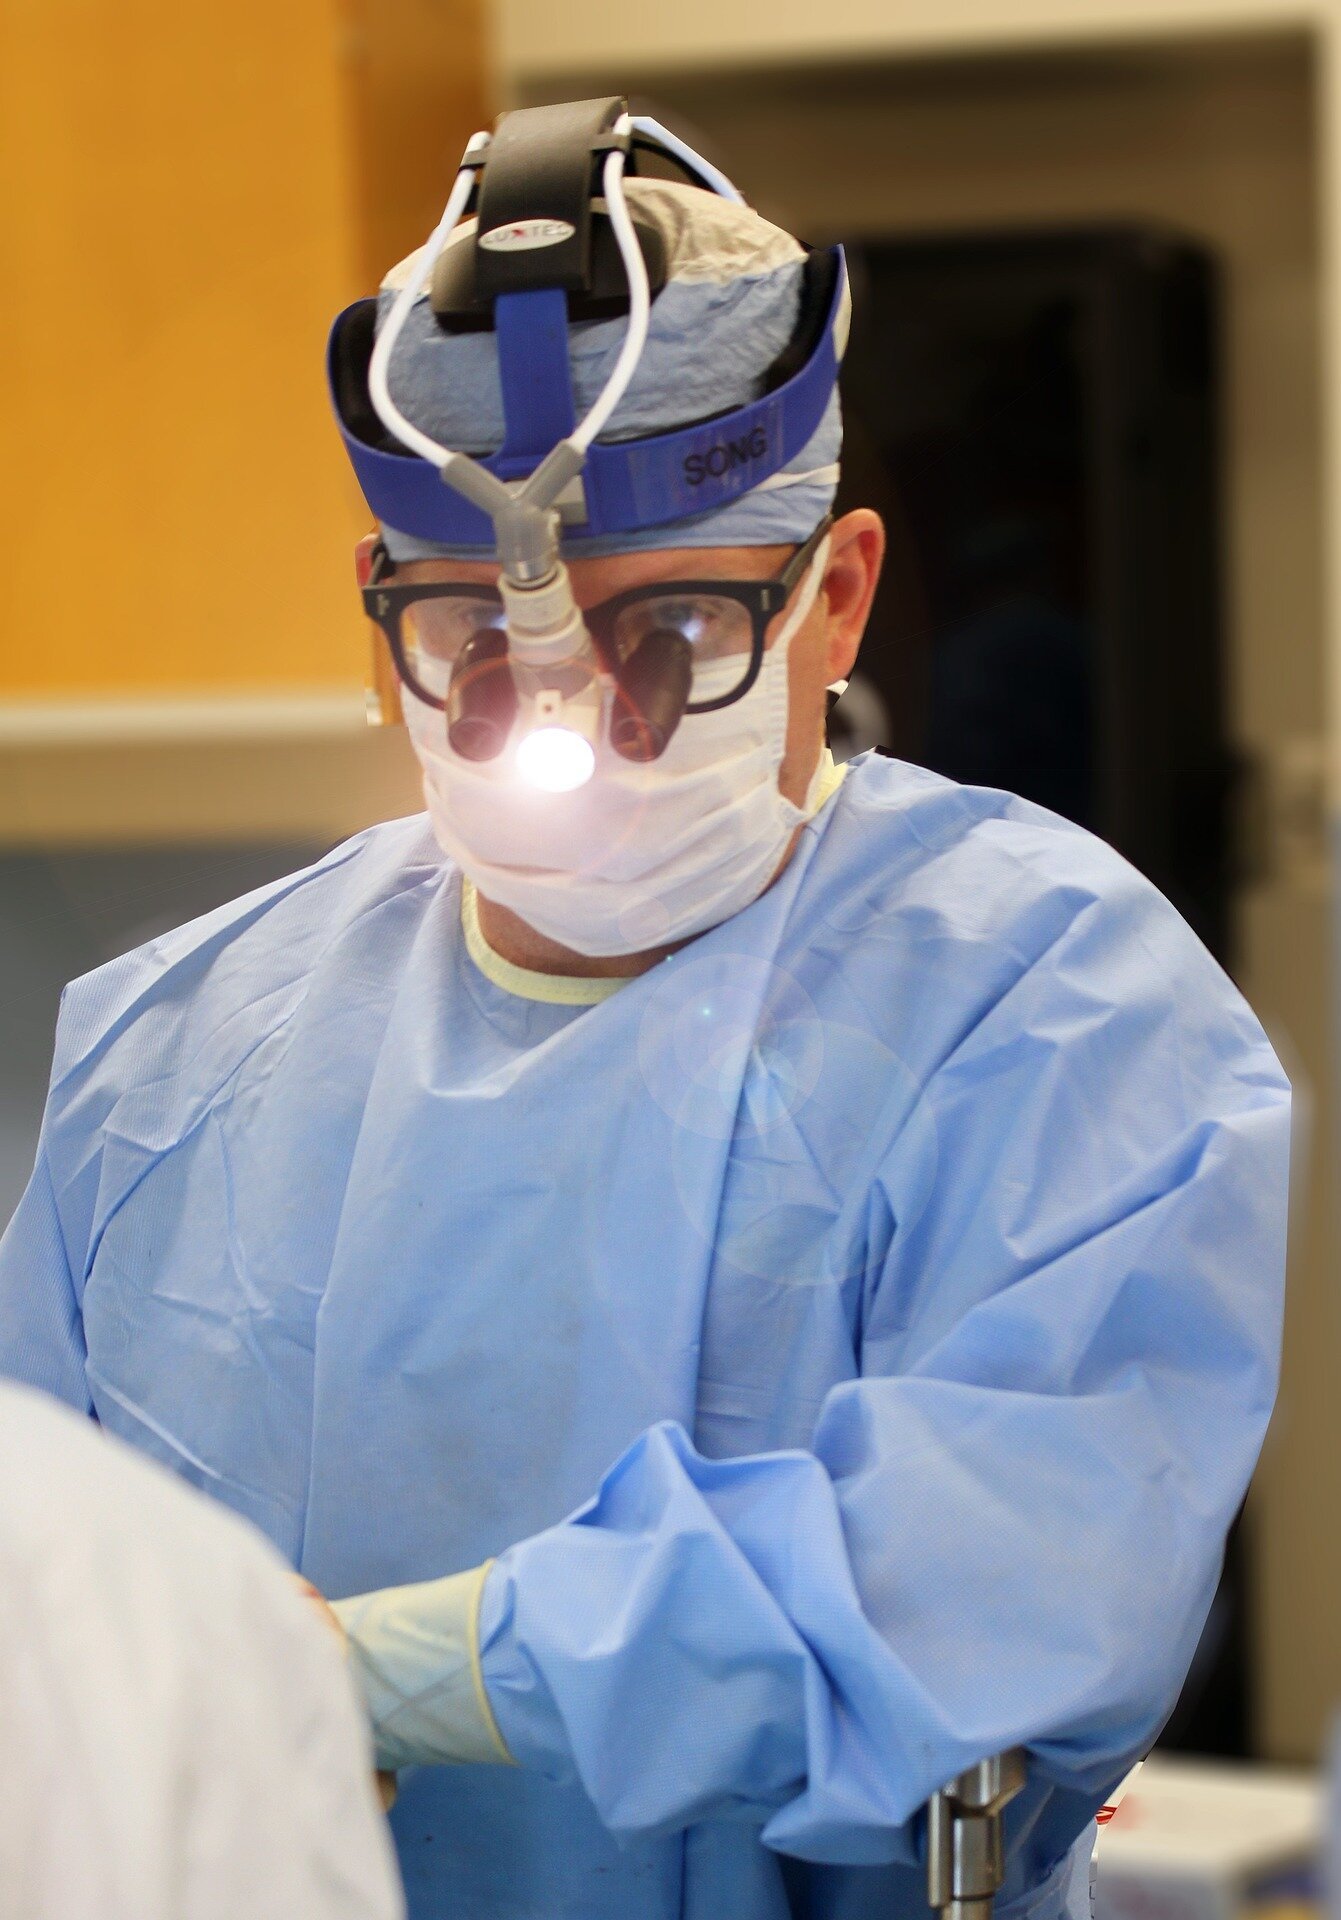 New guidelines uphold lifelong competency of surgeons